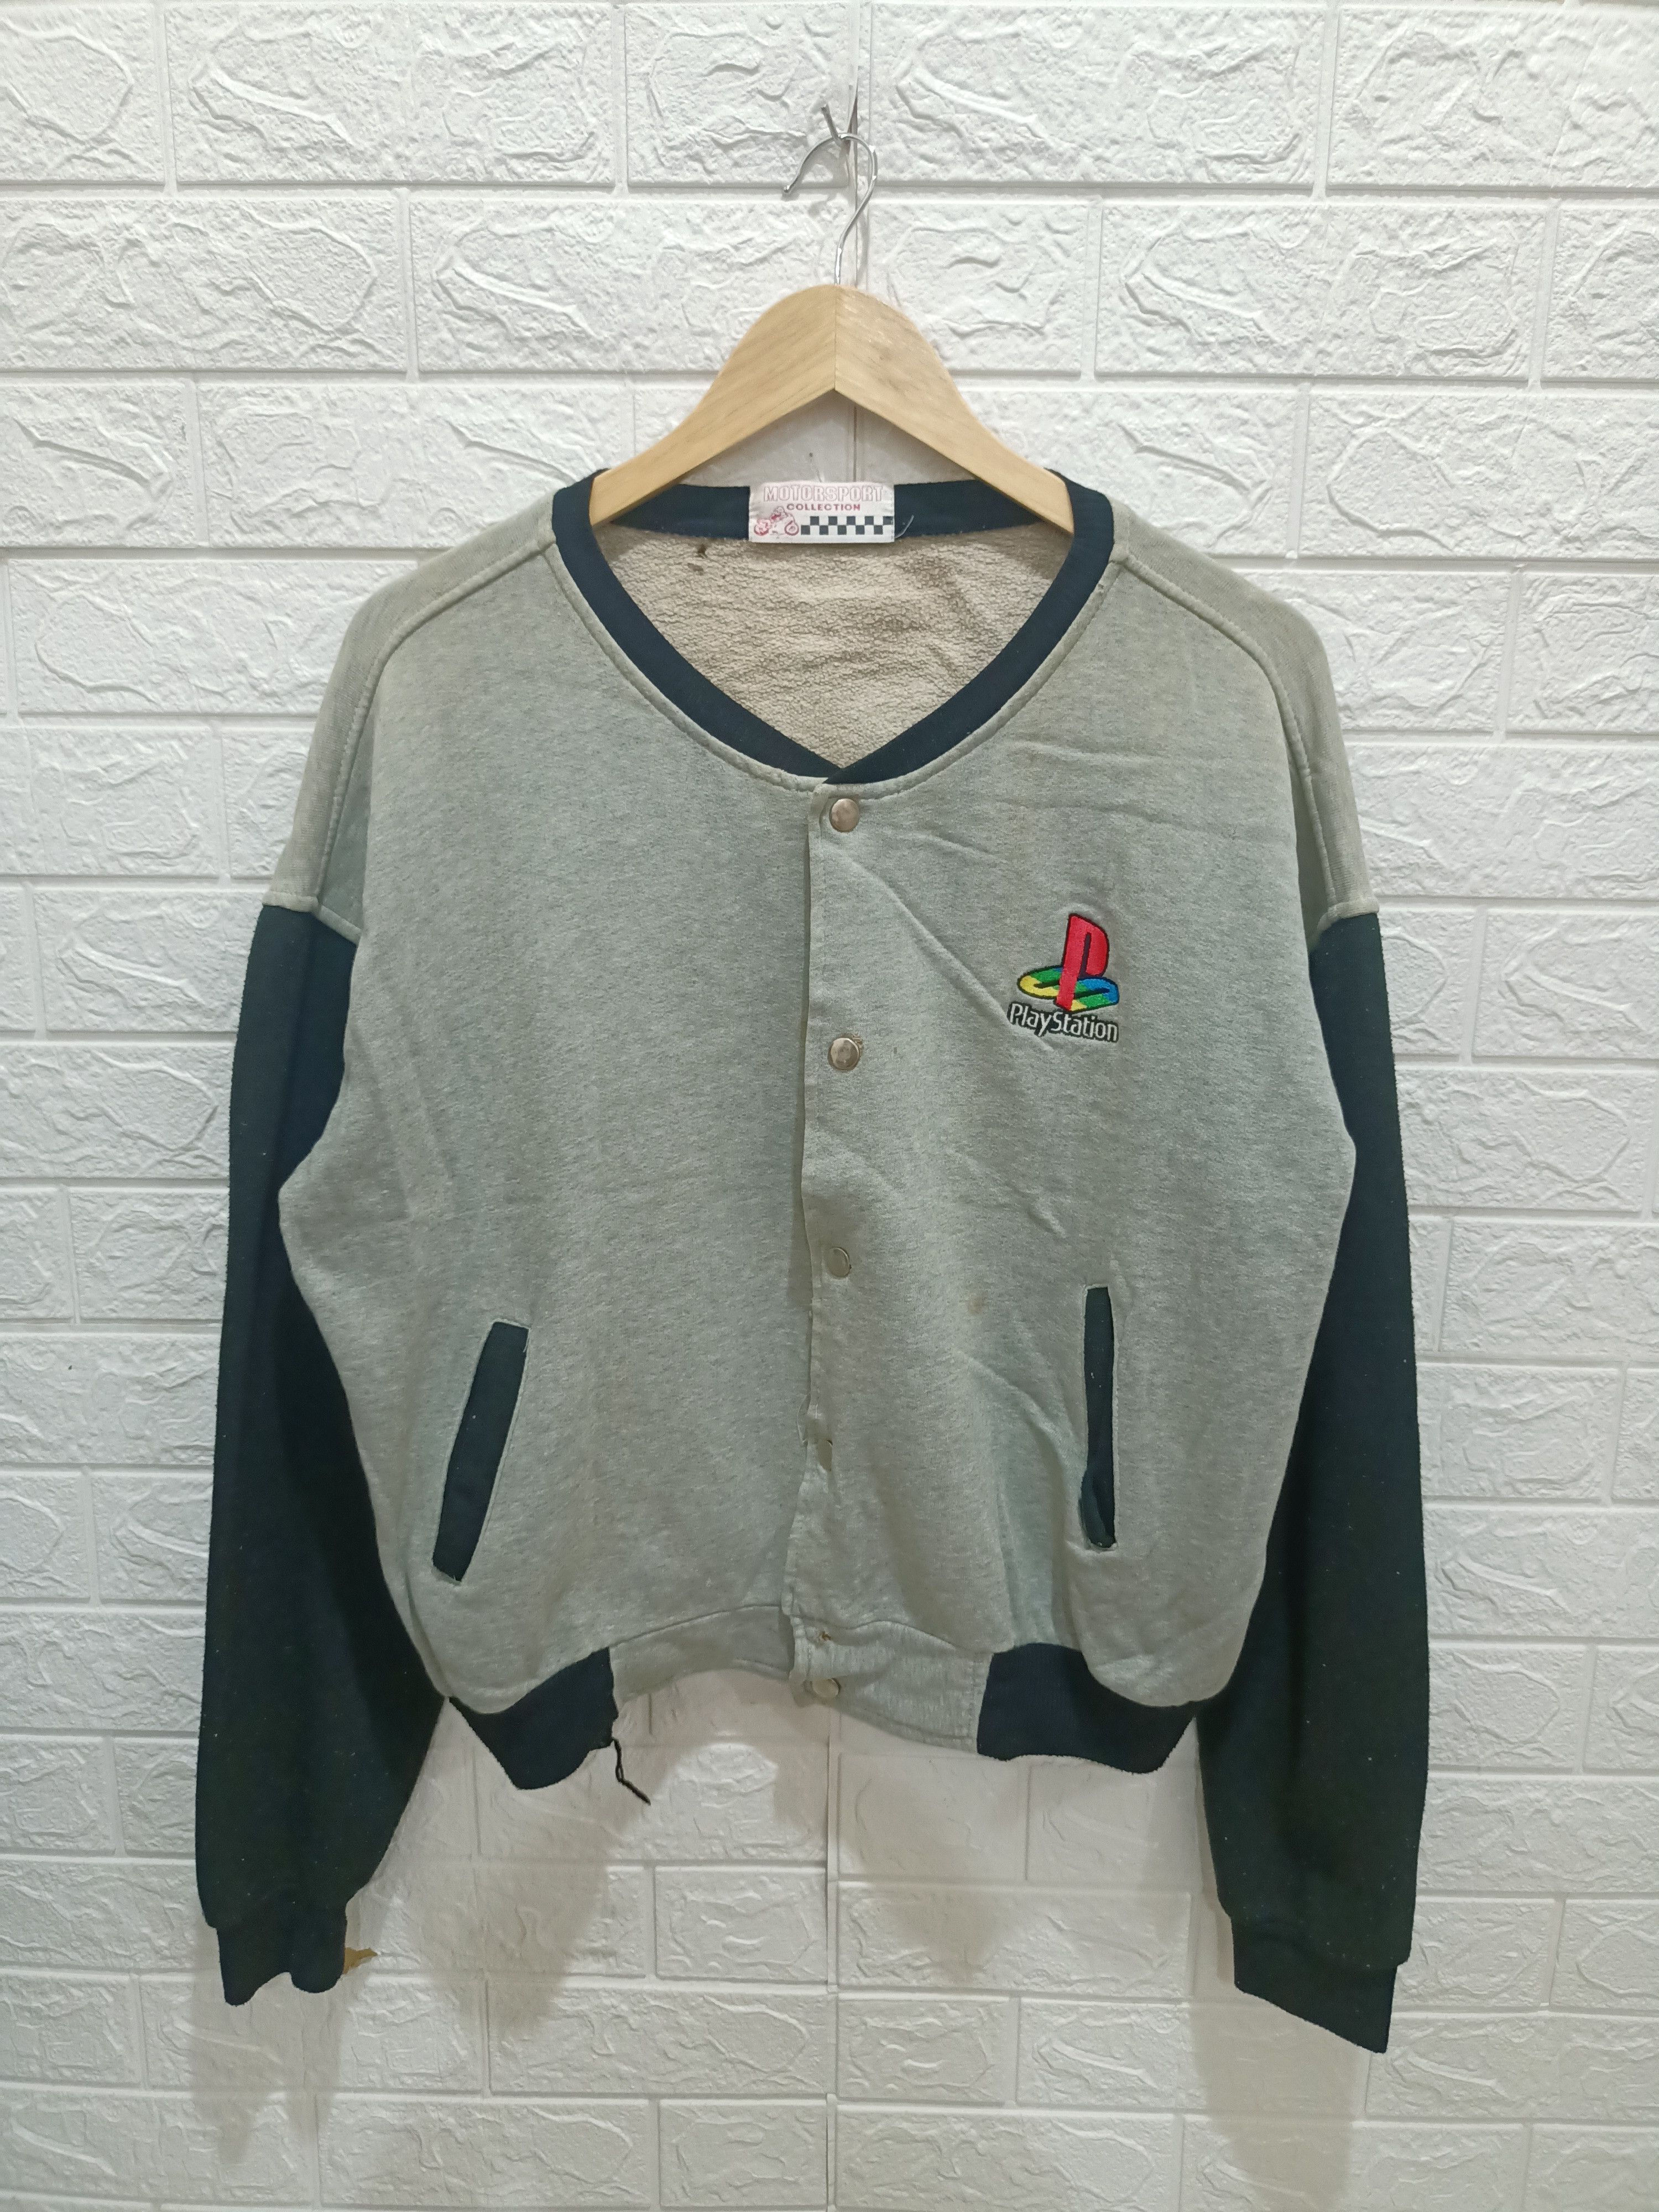 Rare Vintage Playstation Motorsports Collection Sweater - 3